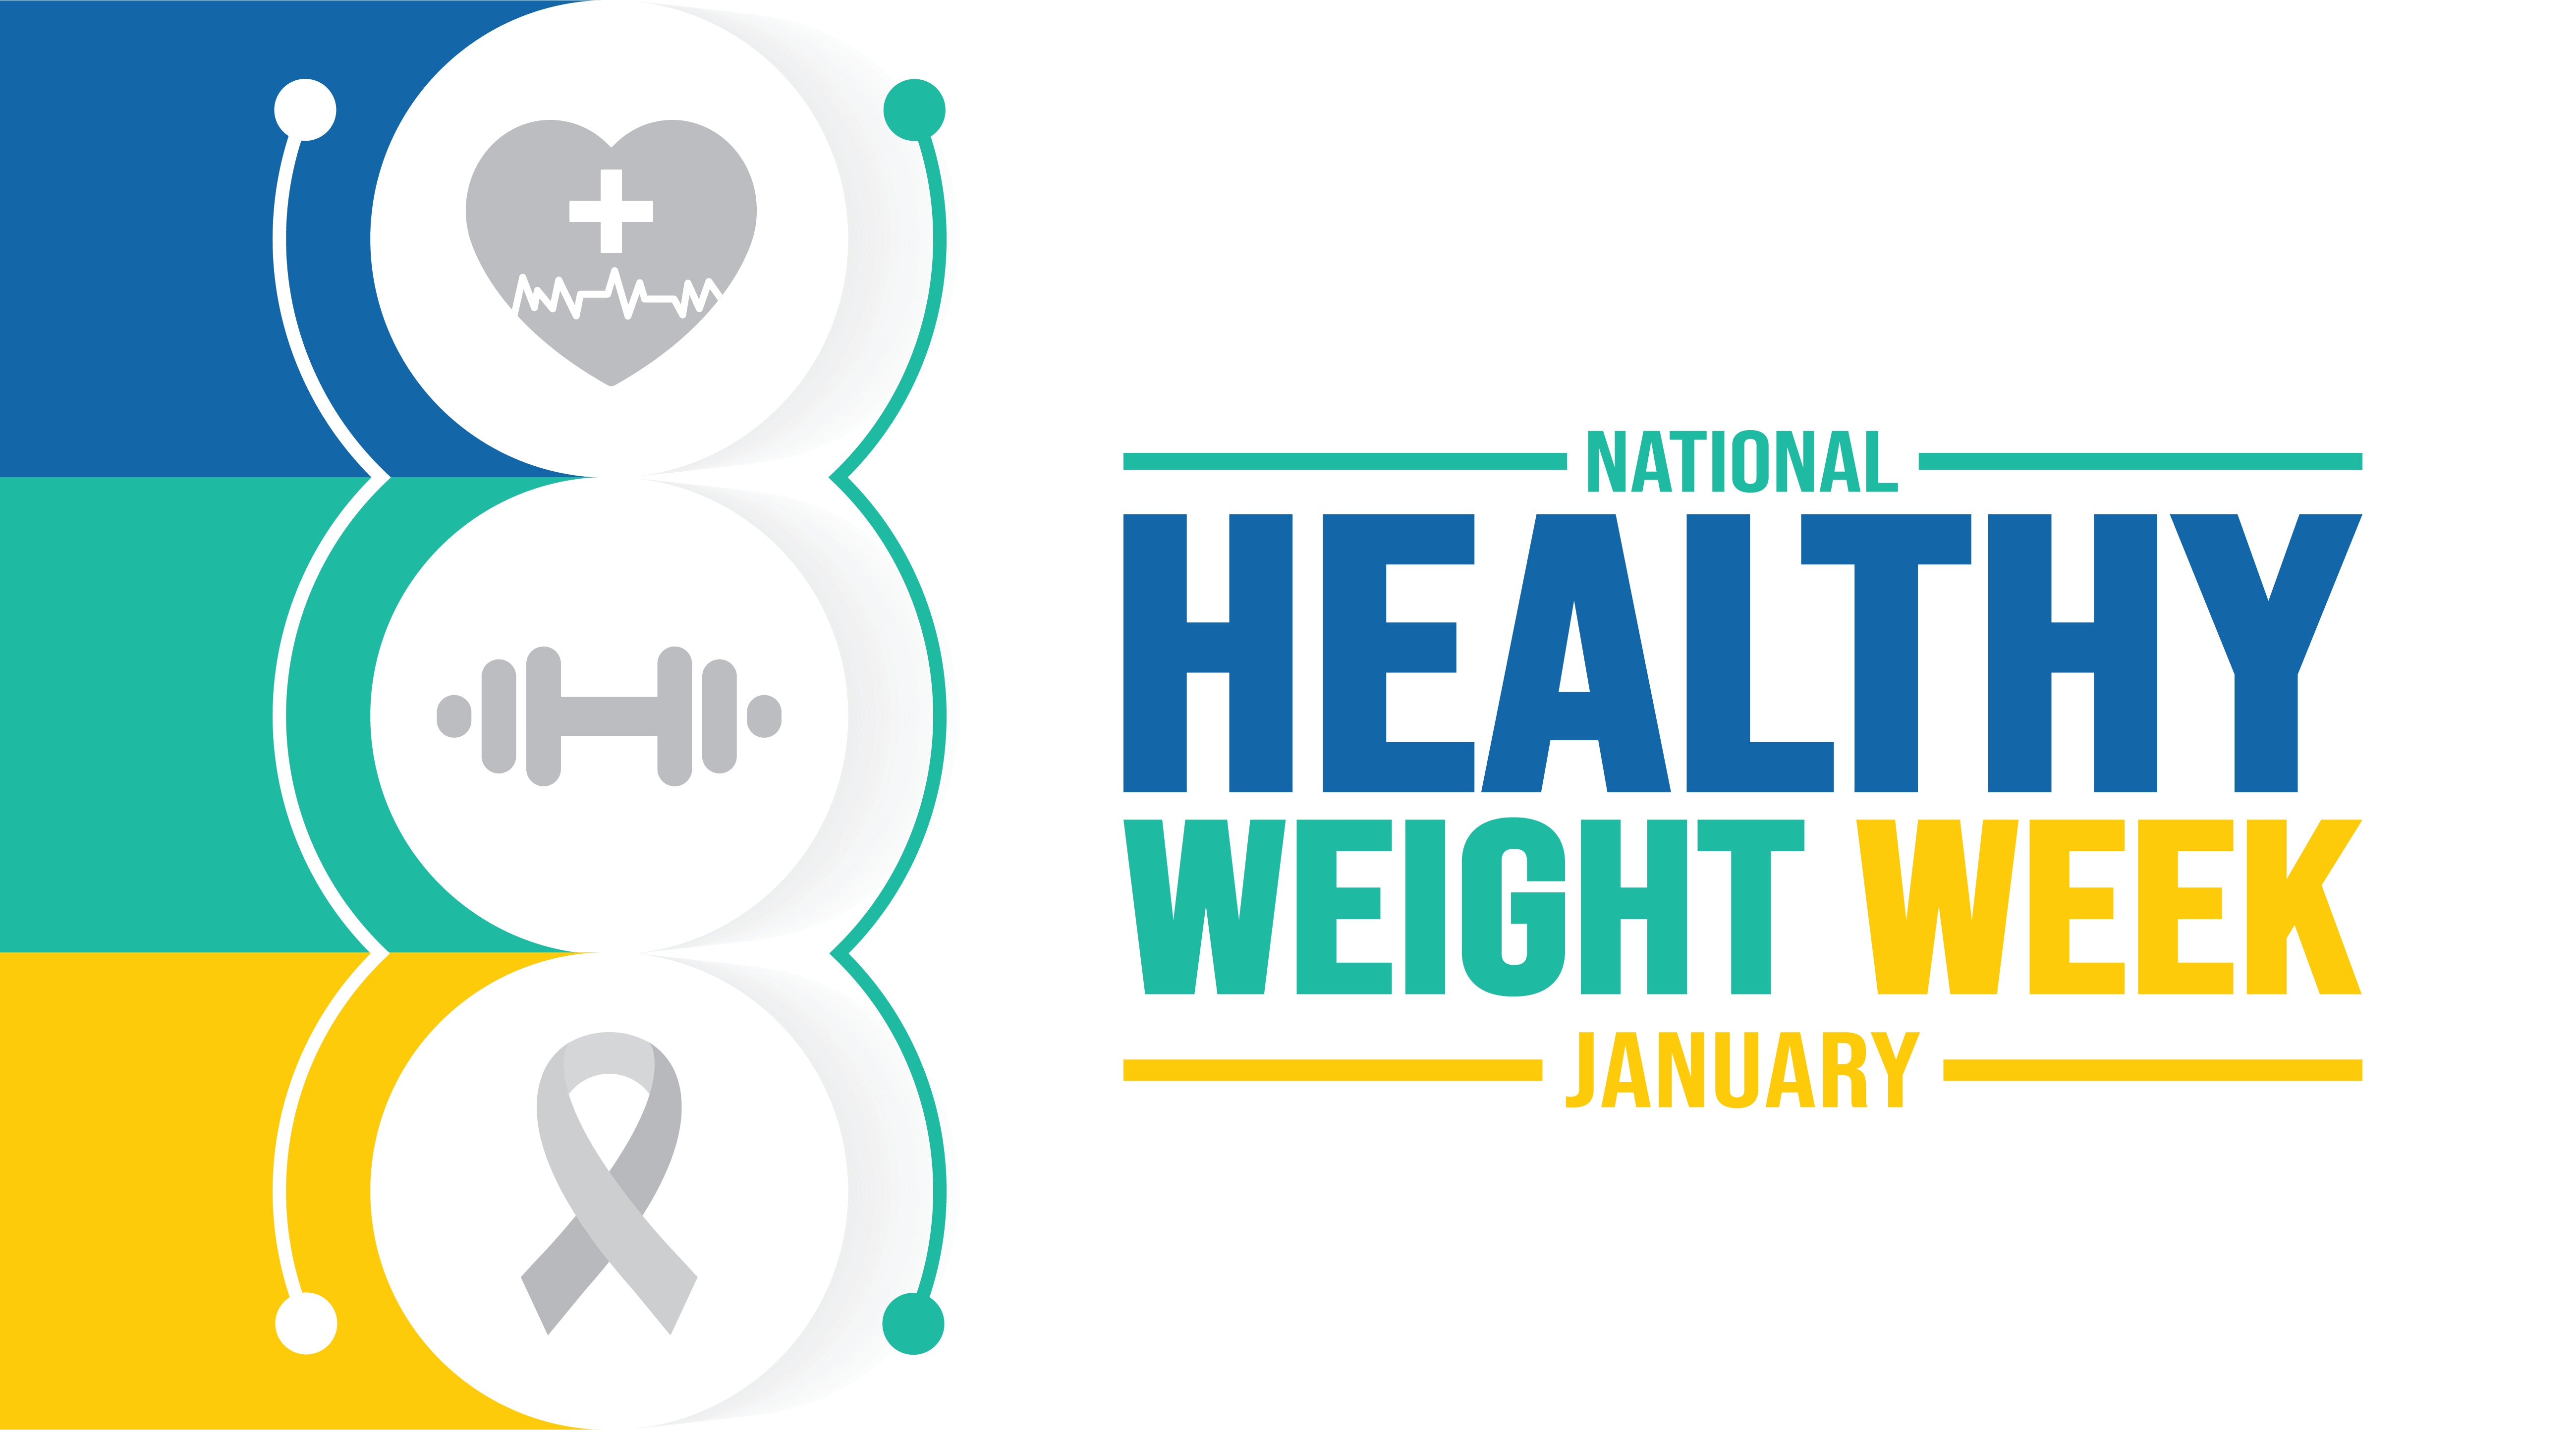 Promoting Healthy Weights During Healthy Weight Week